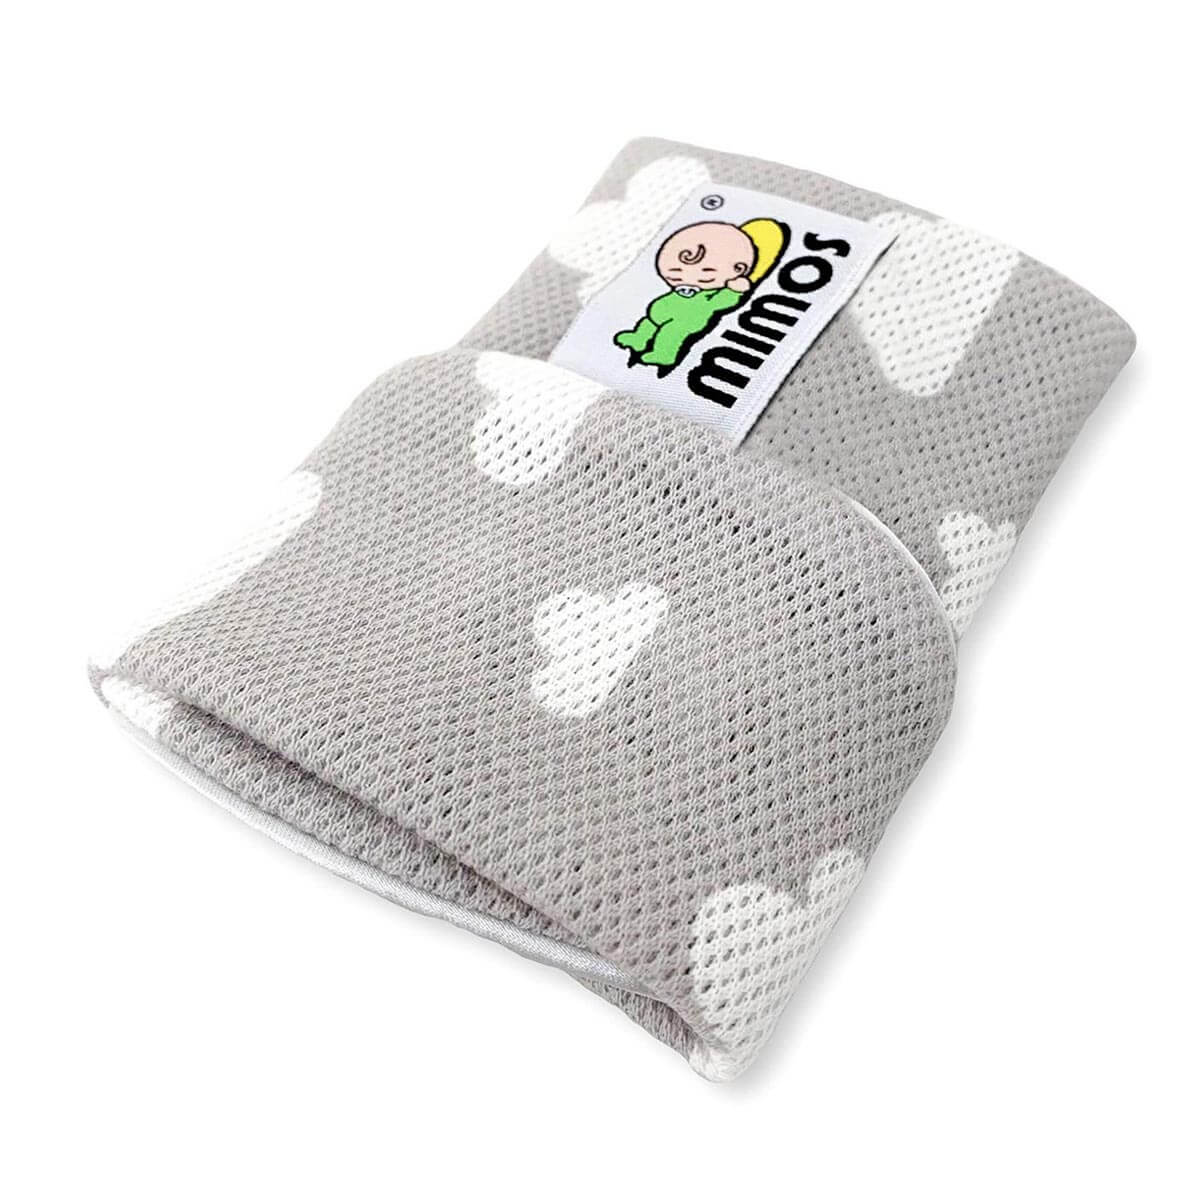 Grey cloud cover for Mimos pillow easy wash and maintain hygienic